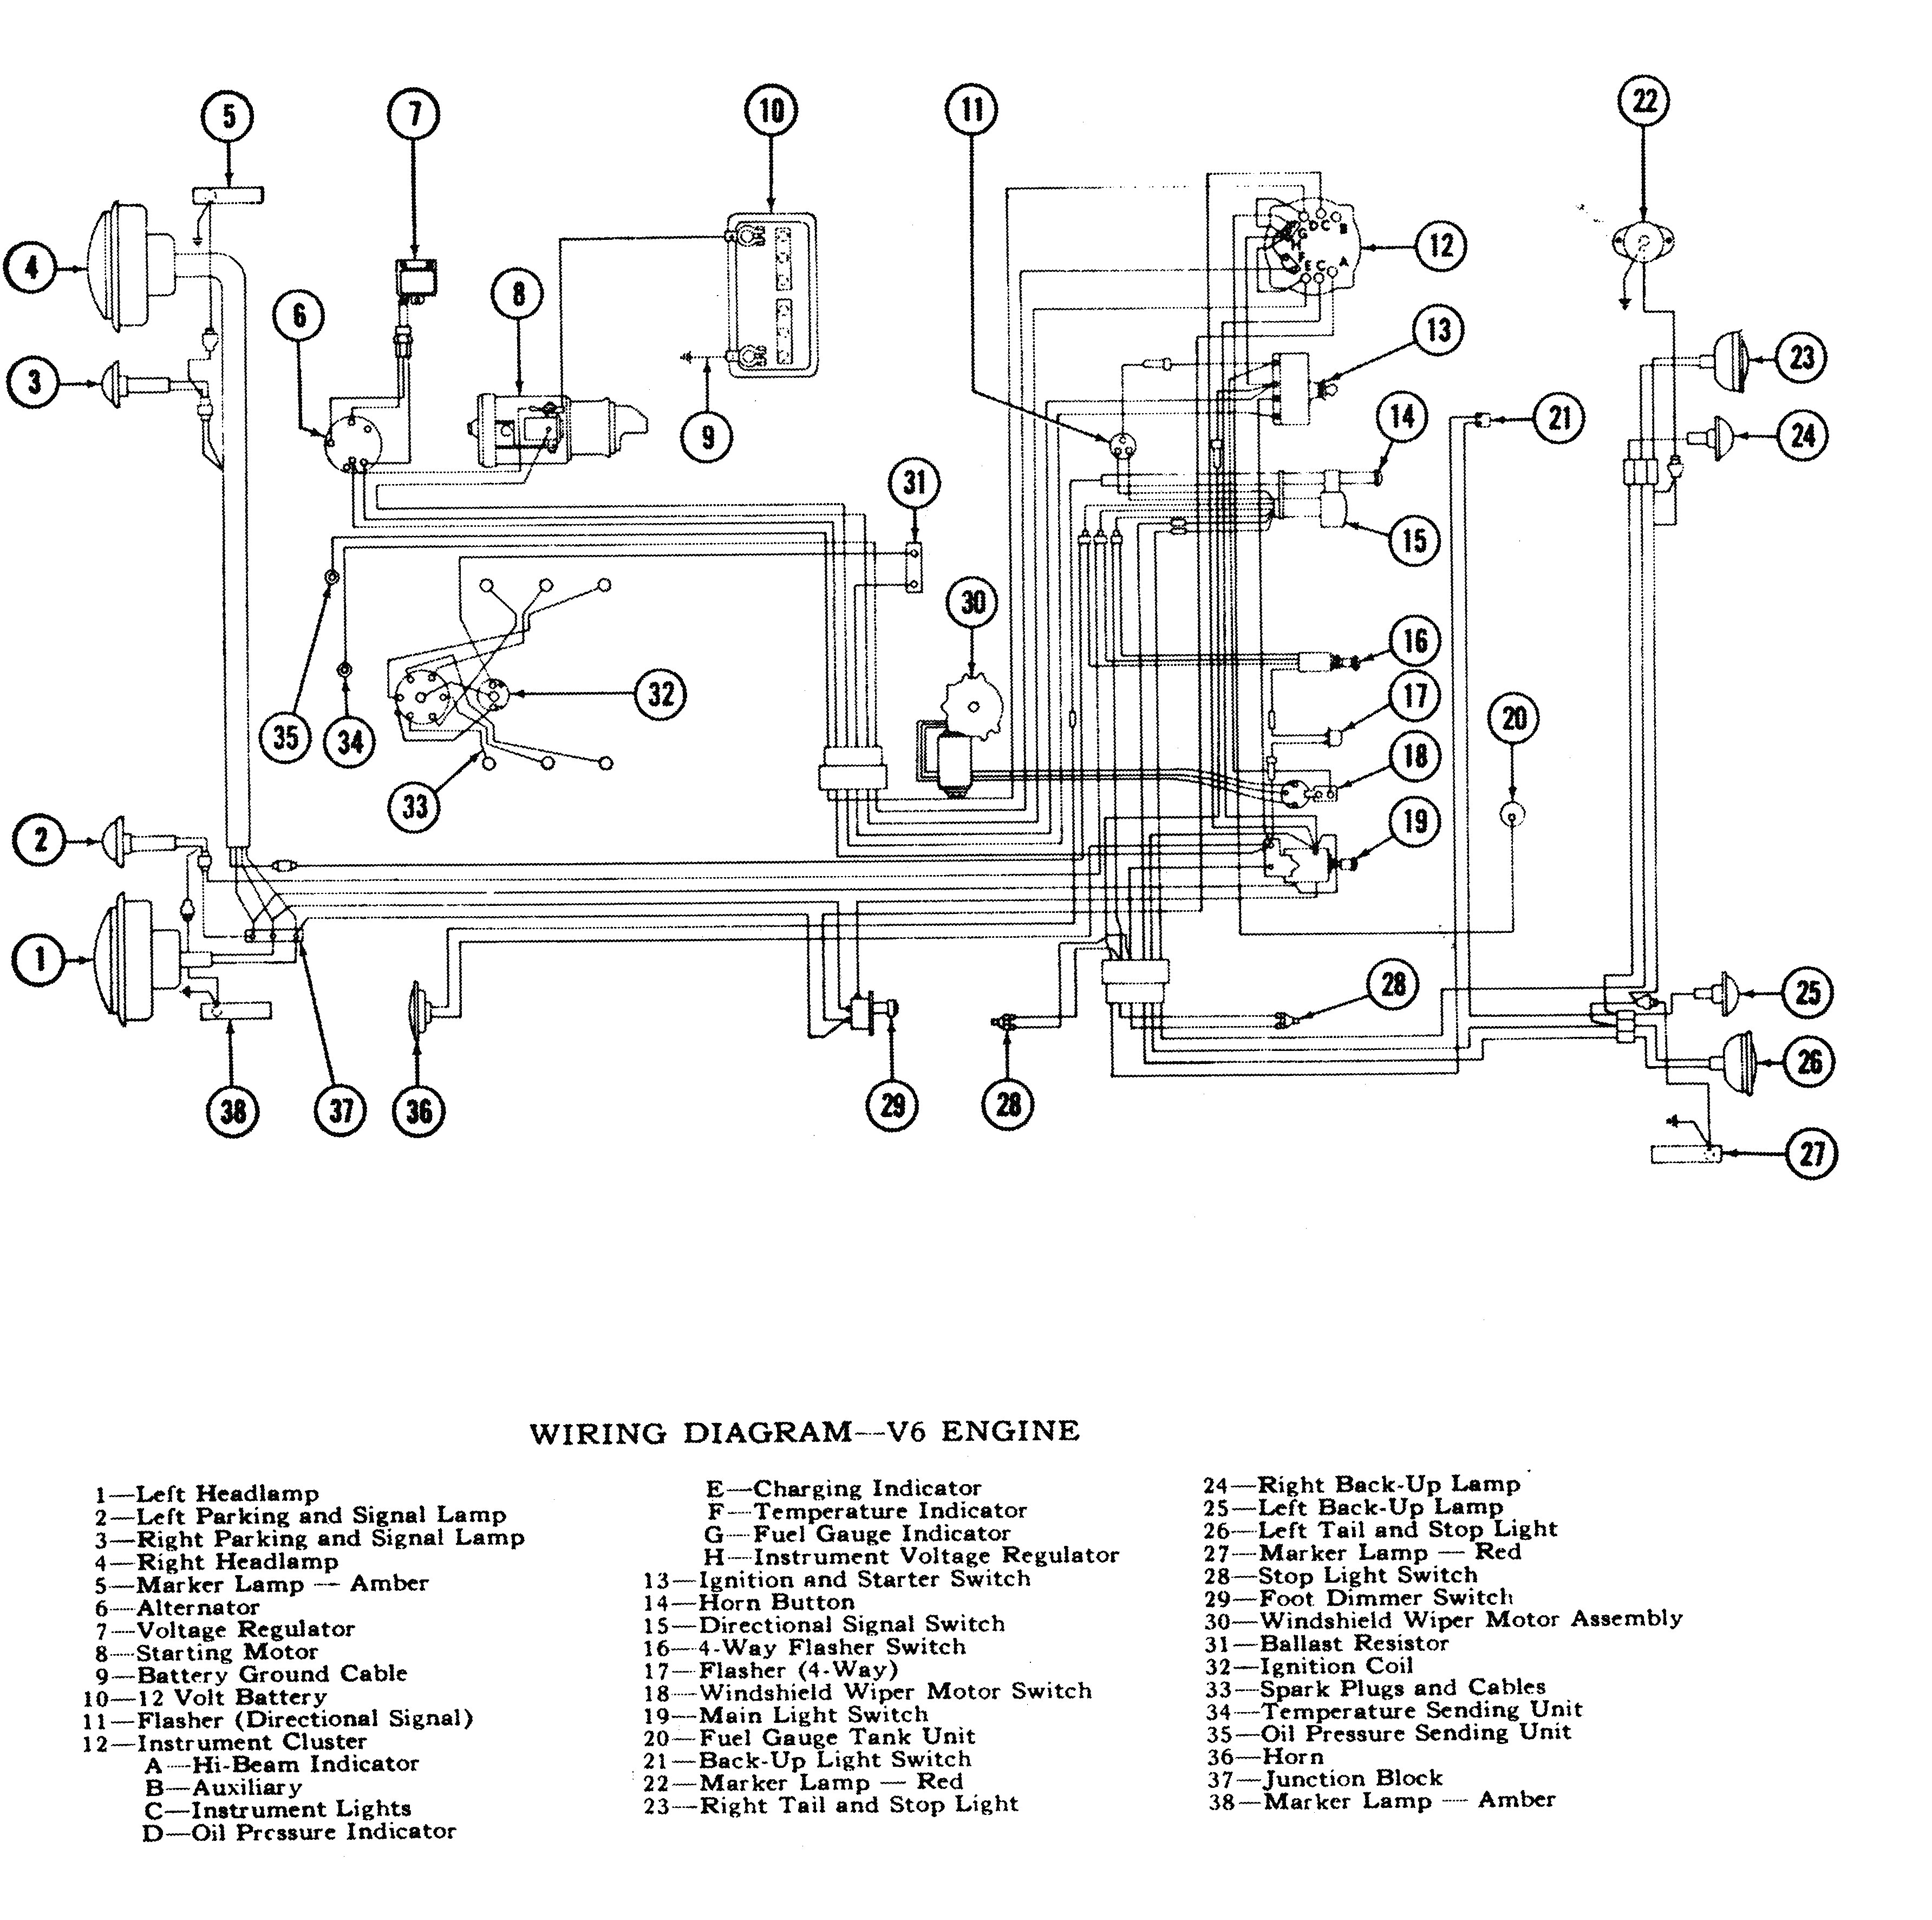 wiring diagram for nippondenso alternator inspirationa modern 5 wire 08 6 vignette electrical of 11